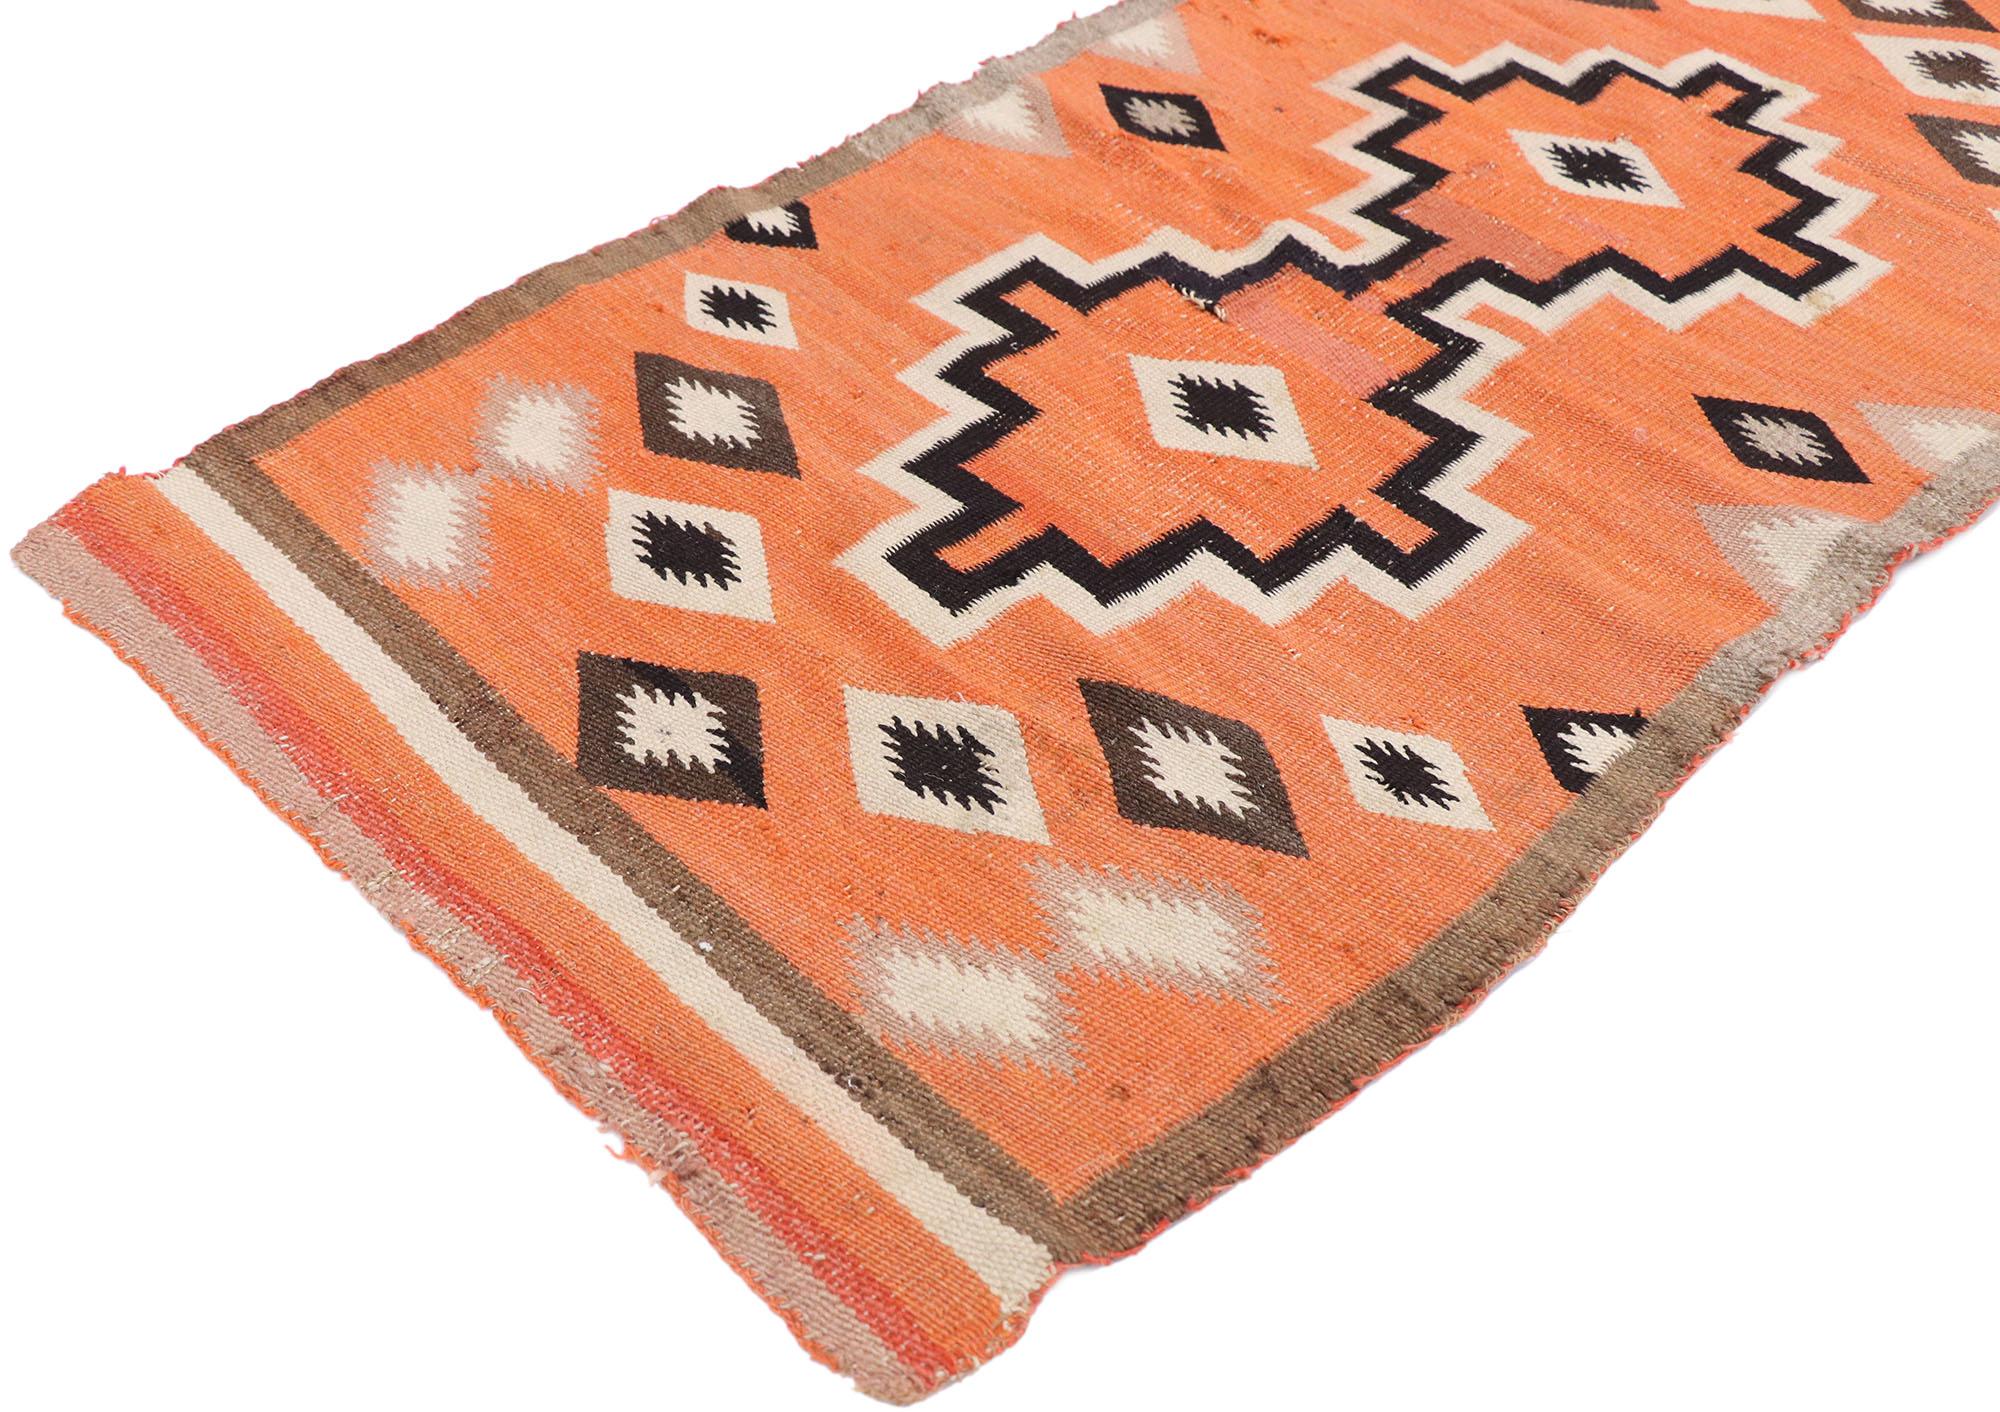 77775 Antique Navajo Kilim rug with Southwestern Tribal Style 02'11 x 03'11. With its bold expressive design, incredible detail and texture, this hand-woven wool antique Navajo Kilim rug is a captivating vision of woven beauty highlighting Native